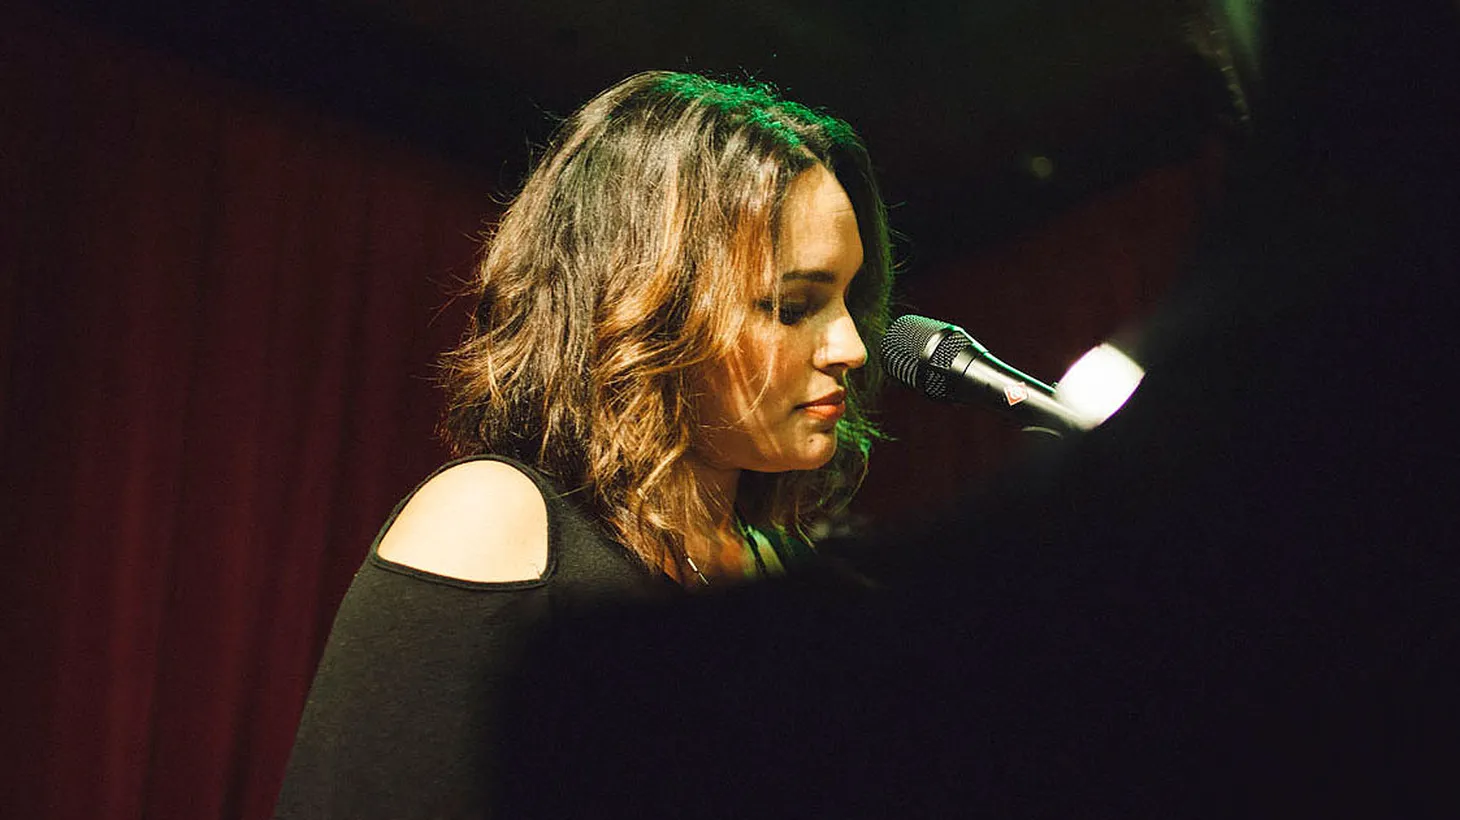 Norah Jones' new album, Day Breaks, is being hailed as a "kindred spirit" to the singer’s breakout debut, Come Away with Me.